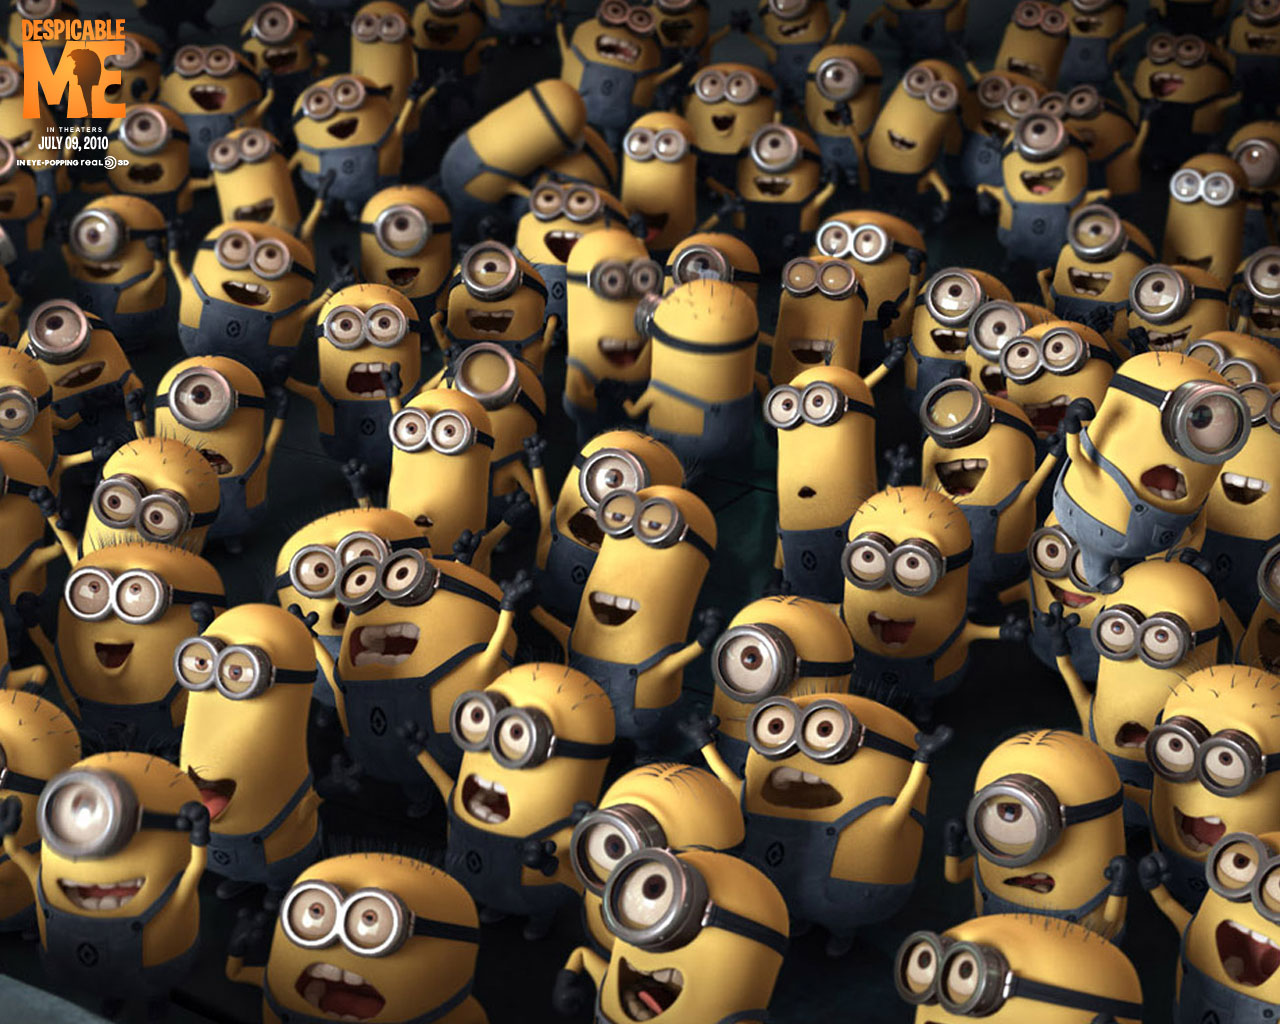 Despicable Me Wallpaper Gallery   Movie Wallpapers